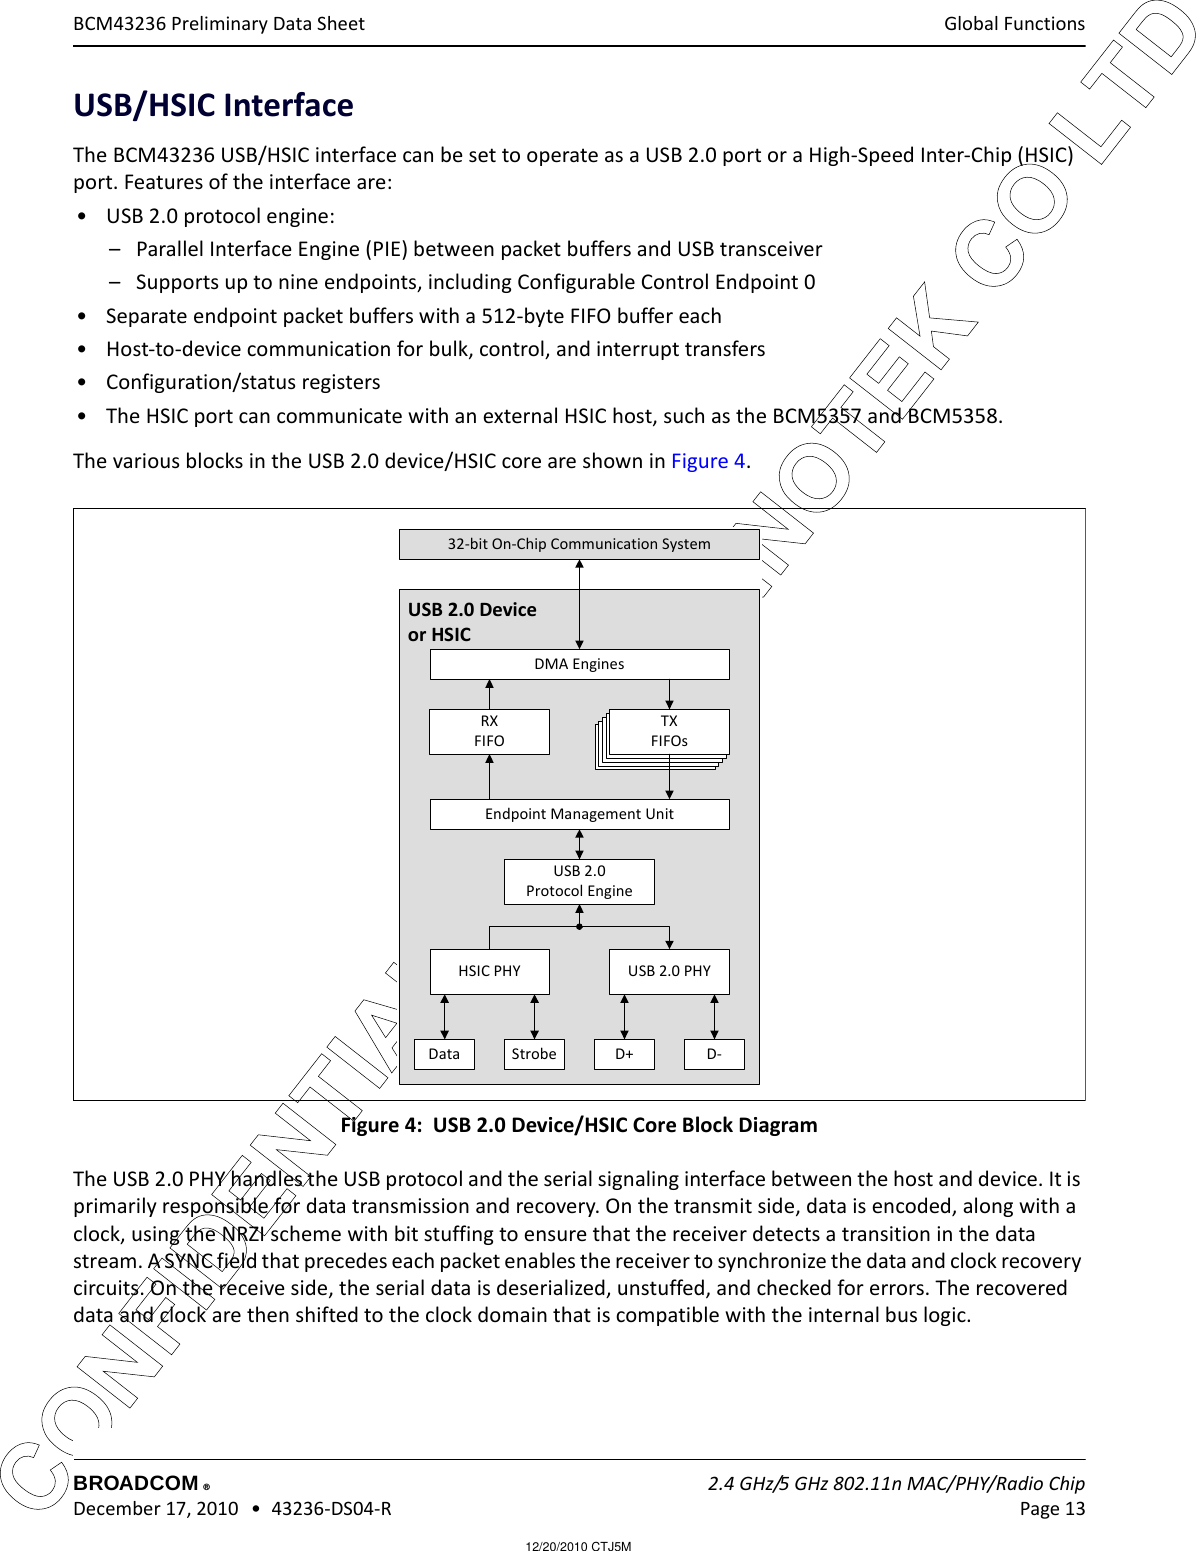 12/20/2010 CTJ5MCONFIDENTIAL FOR LG INNOTEK CO LTD Global FunctionsBROADCOM    2.4 GHz/5 GHz 802.11n MAC/PHY/Radio Chip December 17, 2010   •  43236-DS04-R Page 13®BCM43236 Preliminary Data SheetUSB/HSIC InterfaceThe BCM43236 USB/HSIC interface can be set to operate as a USB 2.0 port or a High-Speed Inter-Chip (HSIC) port. Features of the interface are:• USB 2.0 protocol engine:– Parallel Interface Engine (PIE) between packet buffers and USB transceiver– Supports up to nine endpoints, including Configurable Control Endpoint 0• Separate endpoint packet buffers with a 512-byte FIFO buffer each• Host-to-device communication for bulk, control, and interrupt transfers• Configuration/status registers• The HSIC port can communicate with an external HSIC host, such as the BCM5357 and BCM5358.The various blocks in the USB 2.0 device/HSIC core are shown in Figure 4. Figure 4:  USB 2.0 Device/HSIC Core Block DiagramThe USB 2.0 PHY handles the USB protocol and the serial signaling interface between the host and device. It is primarily responsible for data transmission and recovery. On the transmit side, data is encoded, along with a clock, using the NRZI scheme with bit stuffing to ensure that the receiver detects a transition in the data stream. A SYNC field that precedes each packet enables the receiver to synchronize the data and clock recovery circuits. On the receive side, the serial data is deserialized, unstuffed, and checked for errors. The recovered data and clock are then shifted to the clock domain that is compatible with the internal bus logic.USB 2.0 Deviceor HSICTXFIFOTXFIFOTXFIFOTXFIFOTXFIFOsDMA EnginesRXFIFOEndpoint Management UnitUSB 2.0 Protocol EngineHSIC PHY USB 2.0 PHYData Strobe D+ D-32-bit On-Chip Communication System